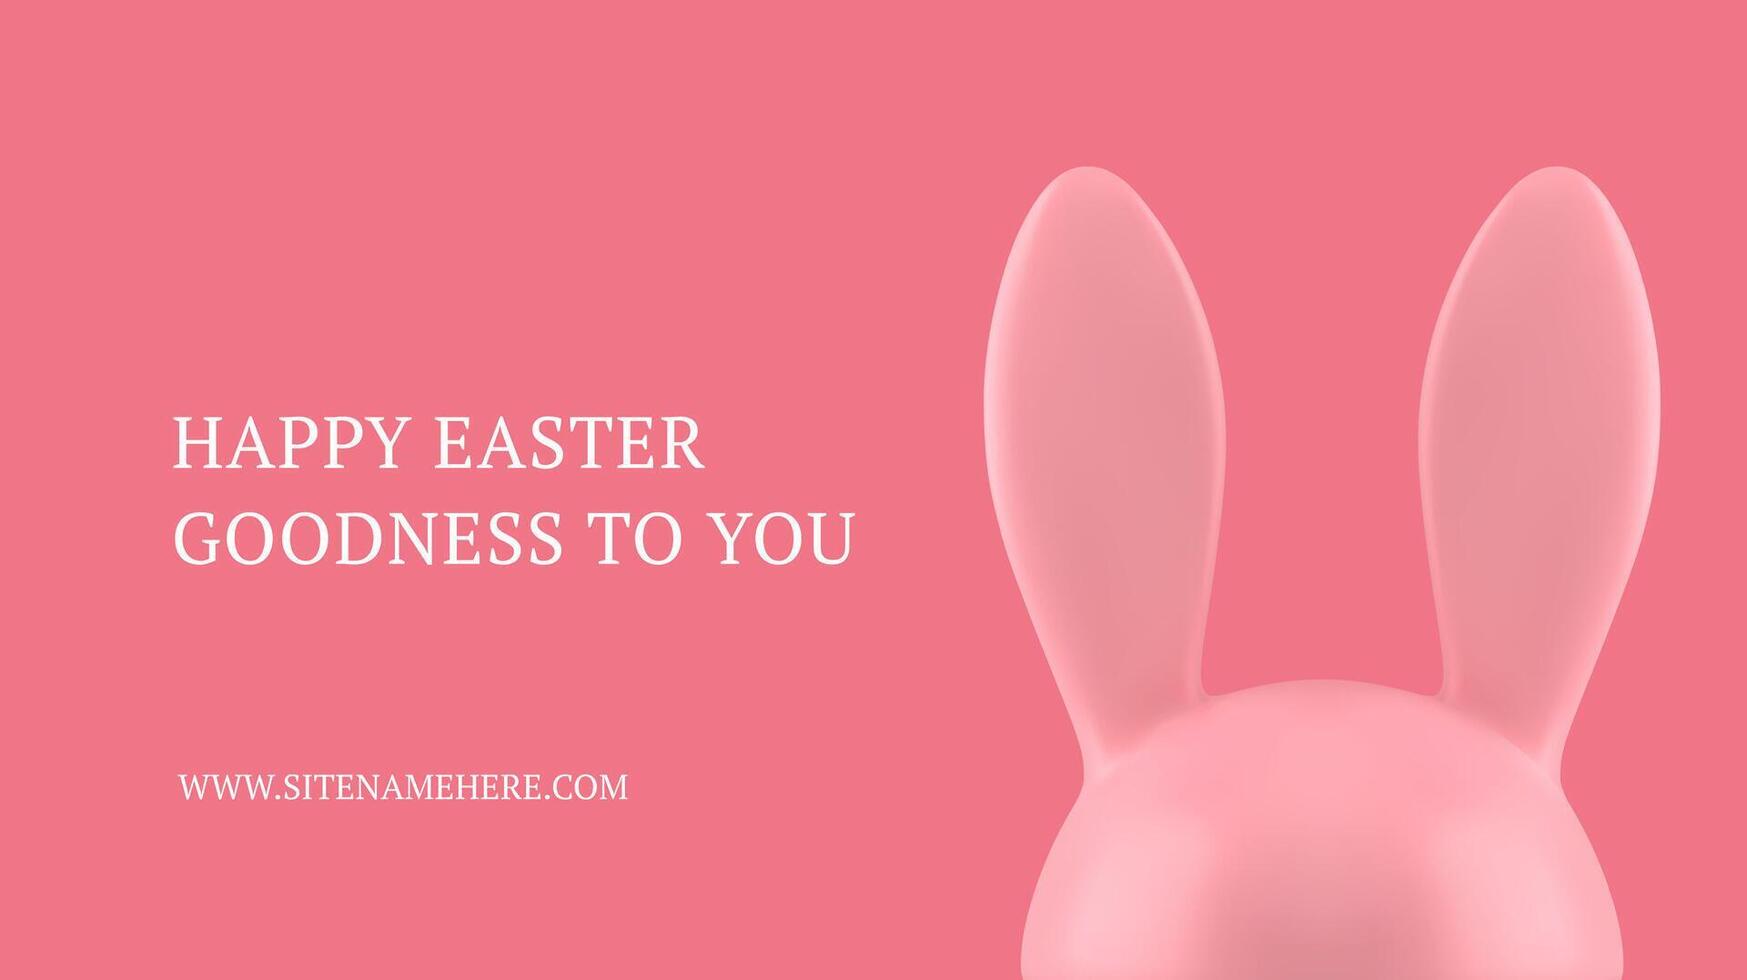 Happy Easter pink bunny head 3d banner design template realistic illustration vector